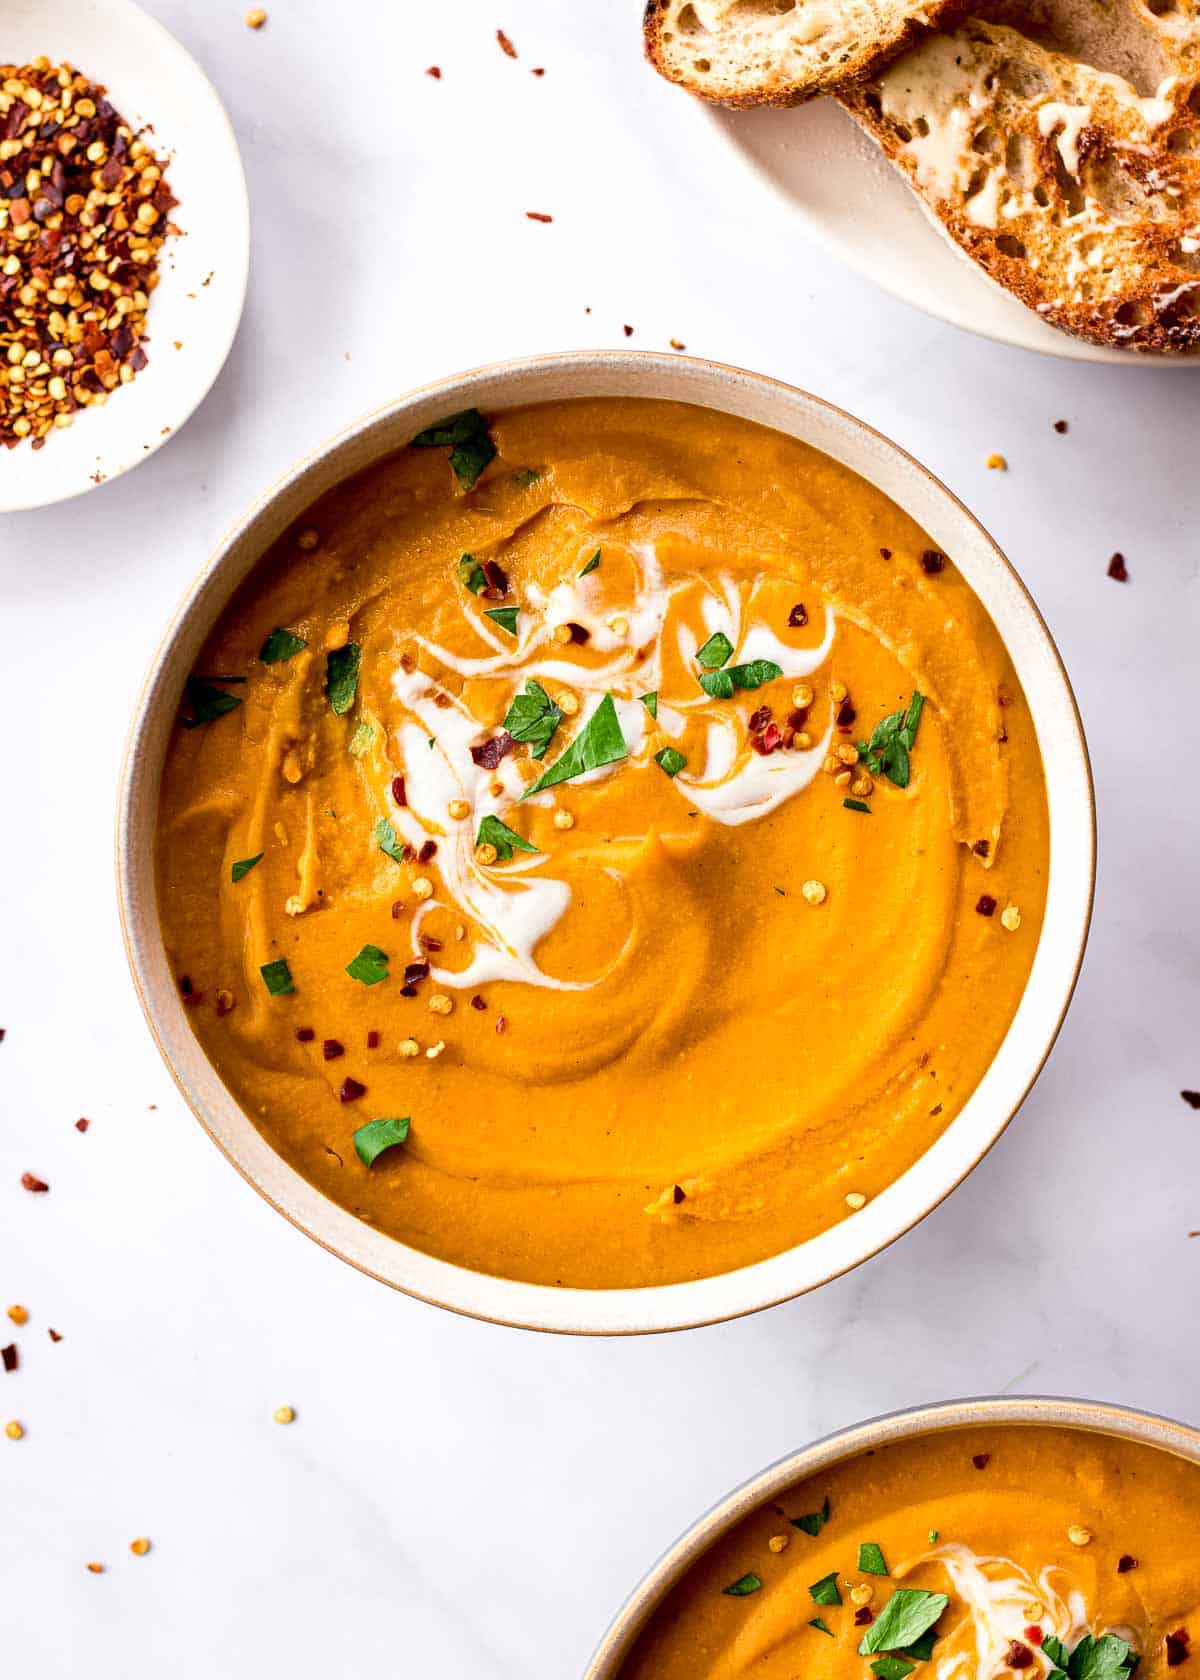 A bowl of lentil and carrot soup deorated with coconut yoghurt, parsley and chili flakes surrounded by bread and chili flakes.